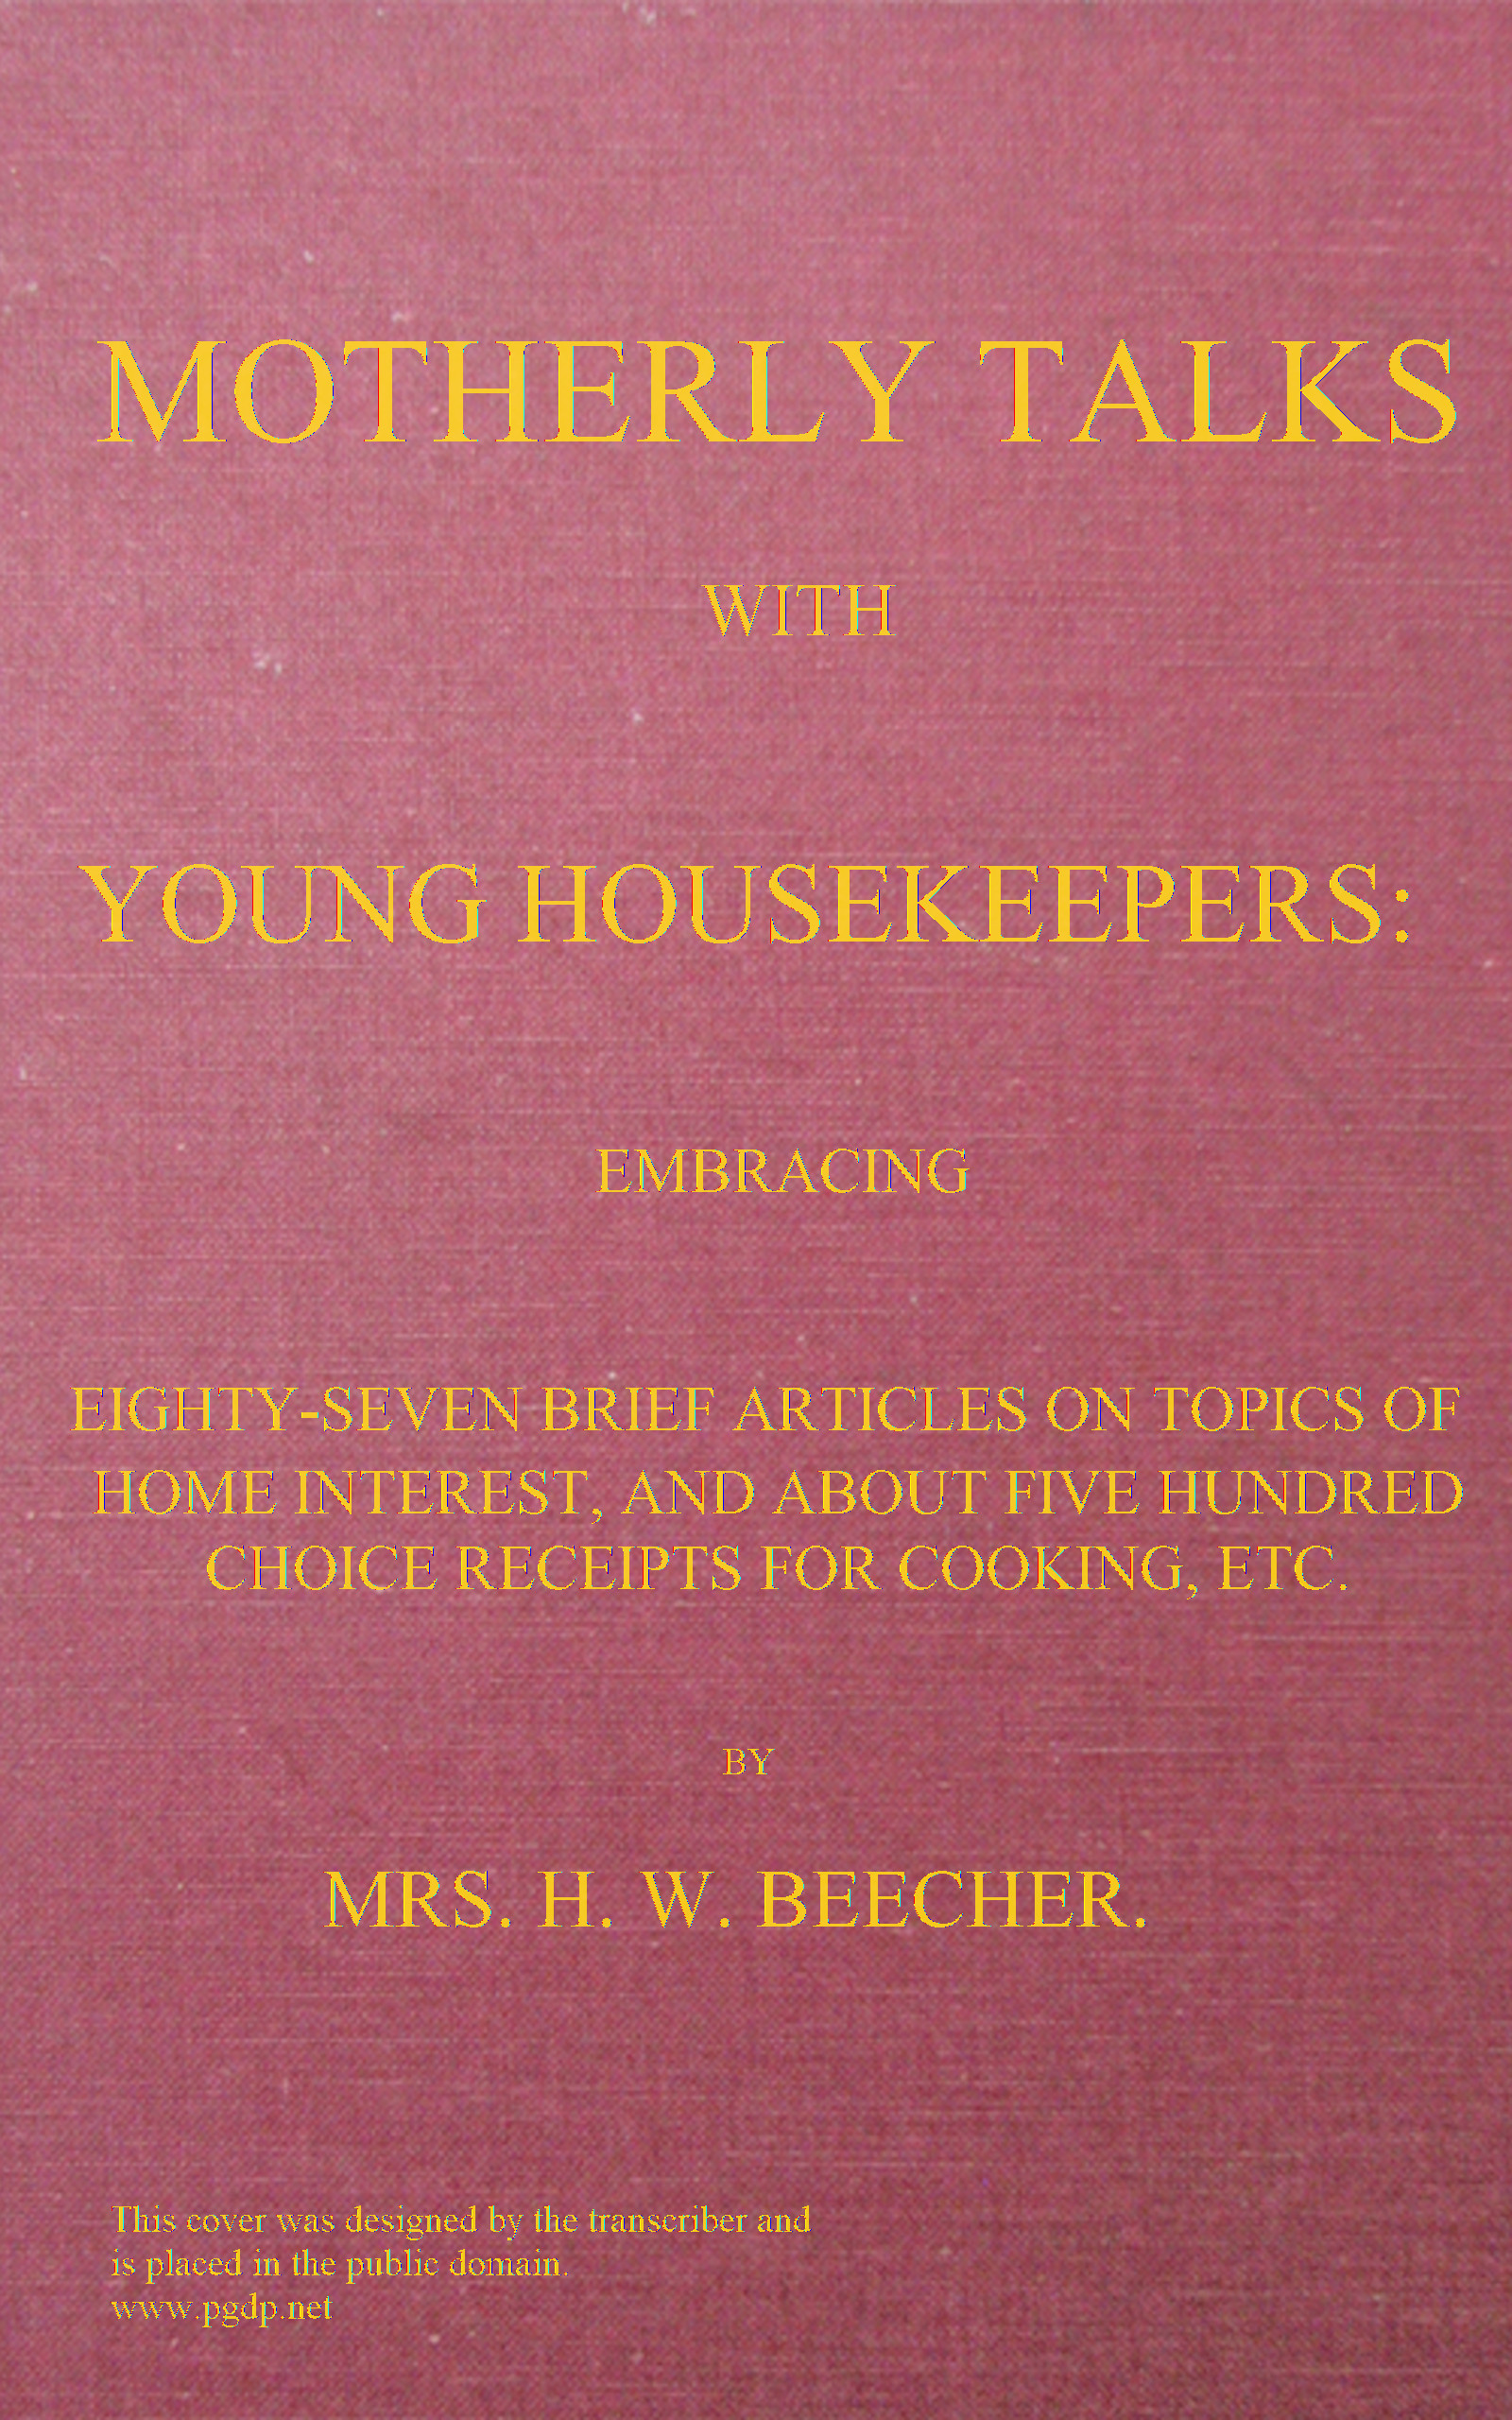 Motherly talks with young housekeepers&#10;embracing eighty-seven brief articles on topics of home interest, and about five hundred choice receipts for cooking, etc.